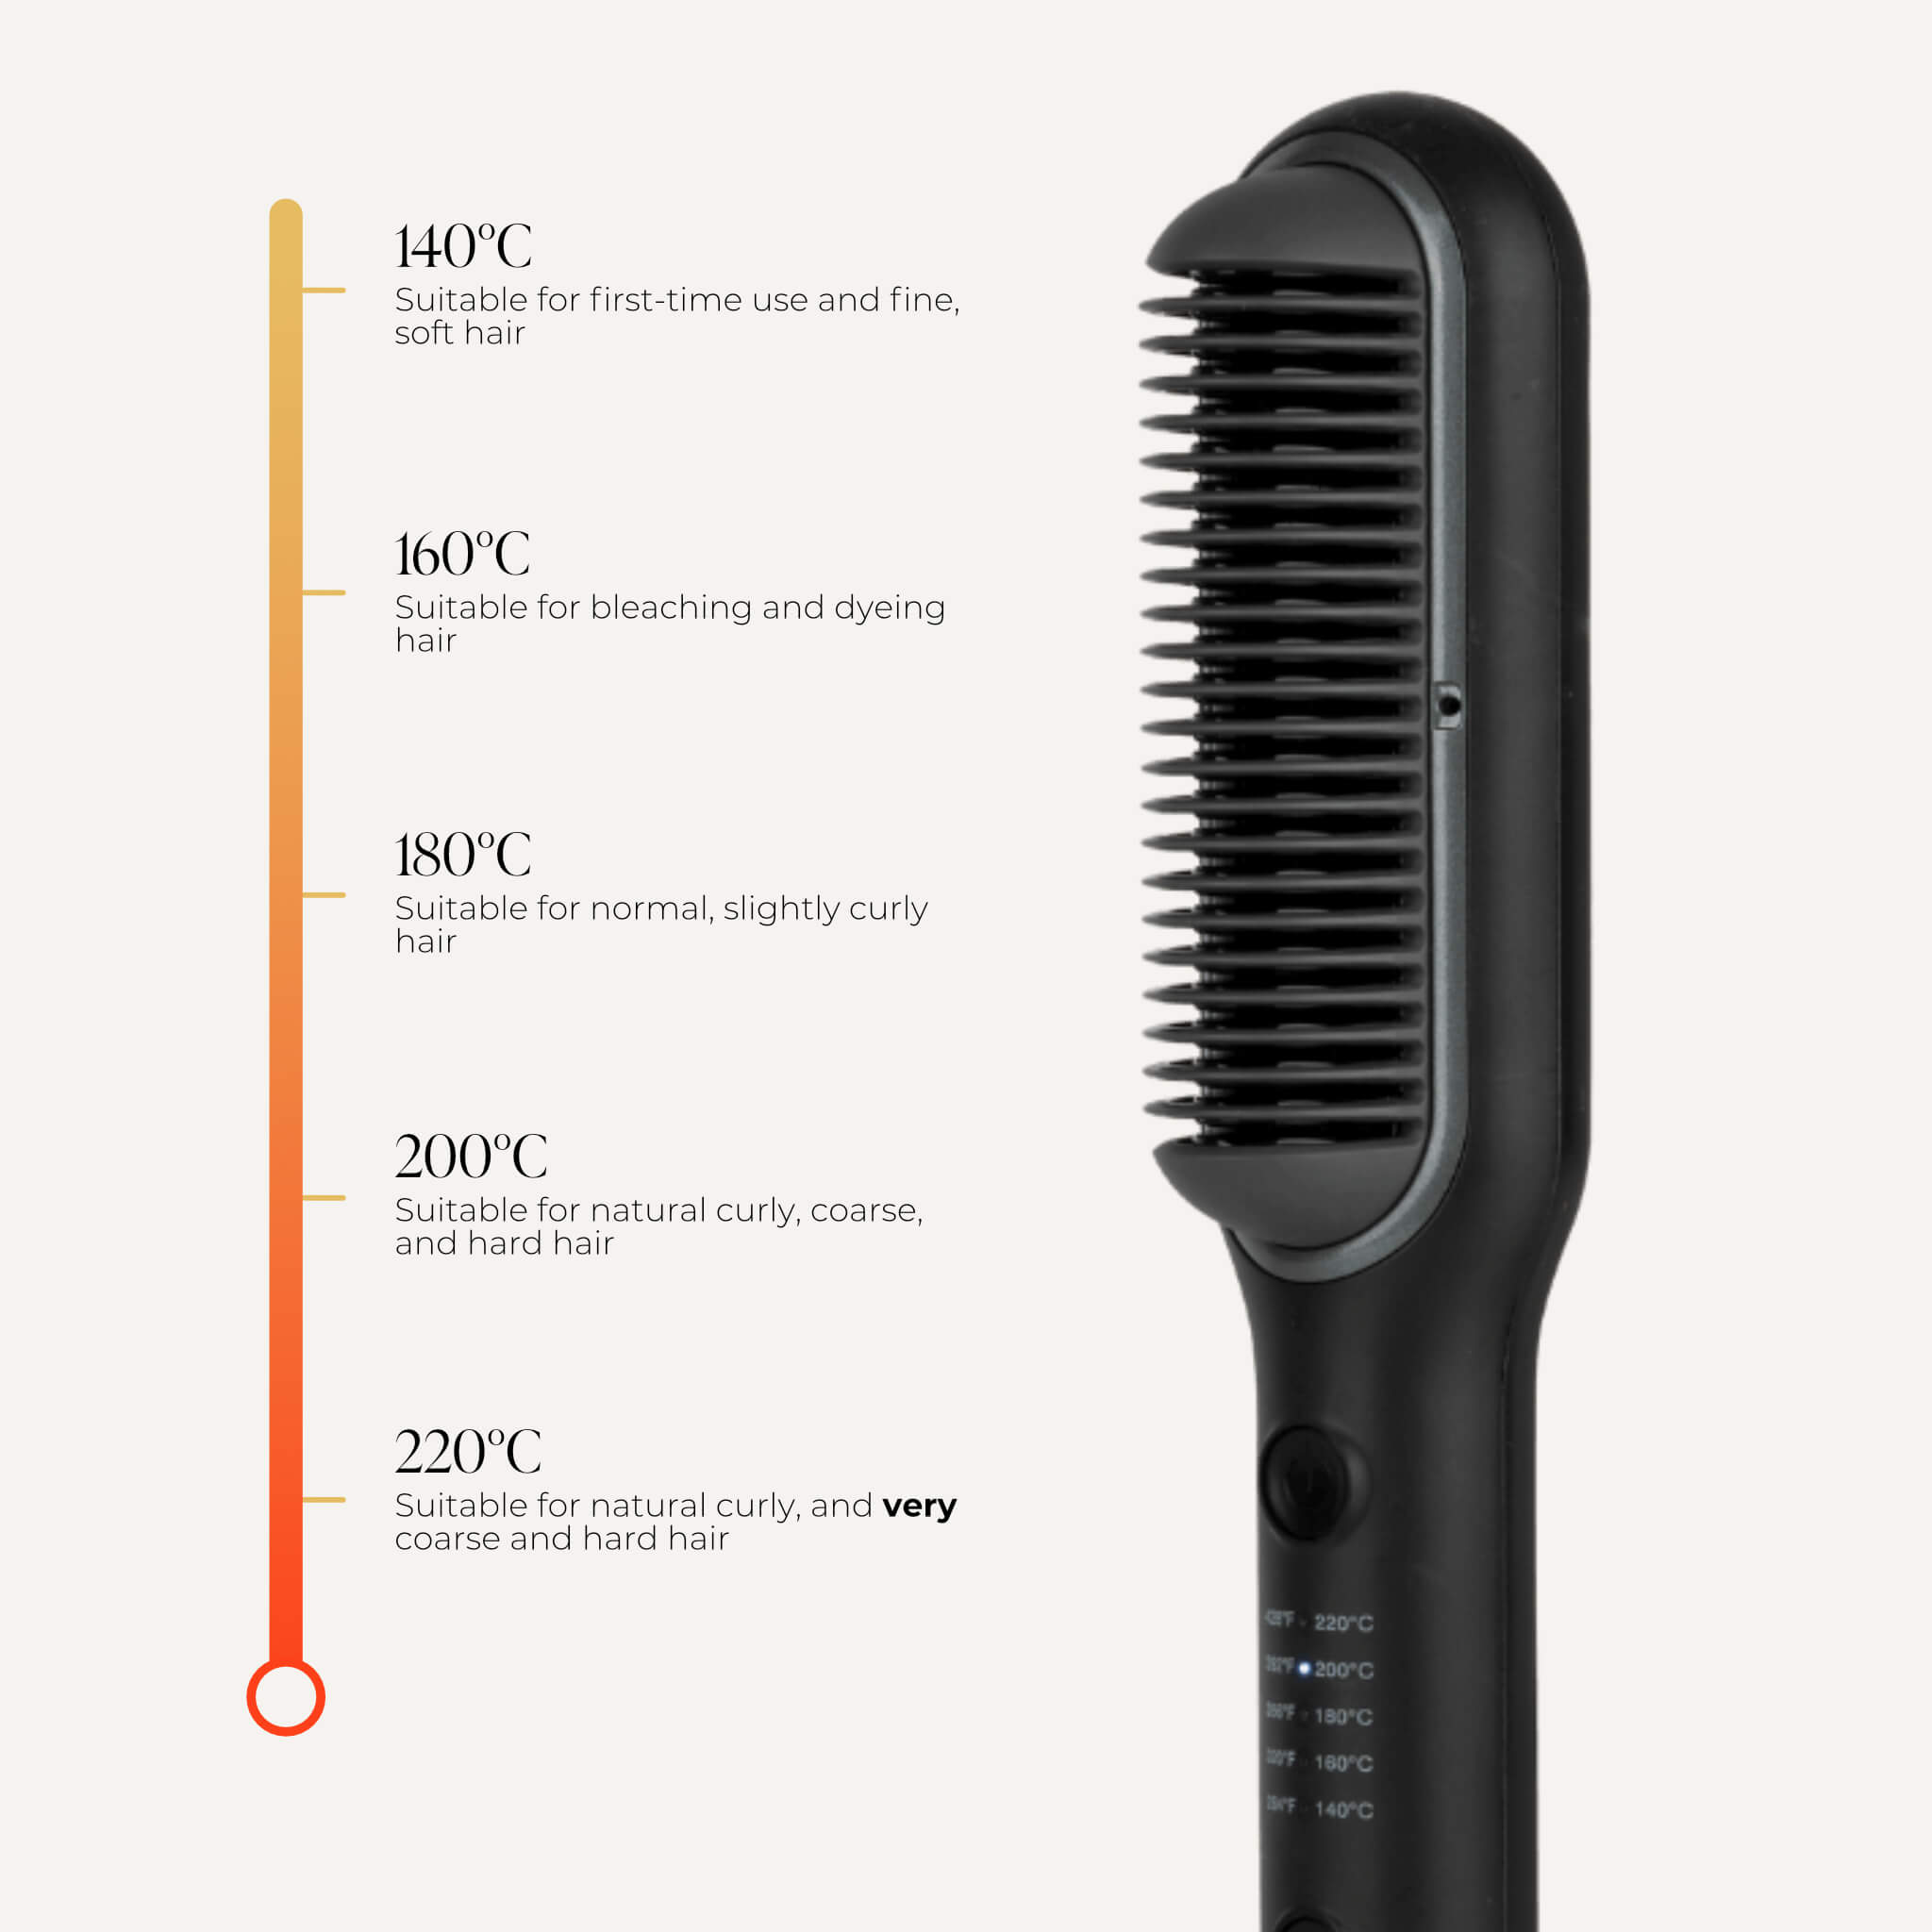 Comforth Smoothing Brush - 2-in-1 Comb and Straightening Iron